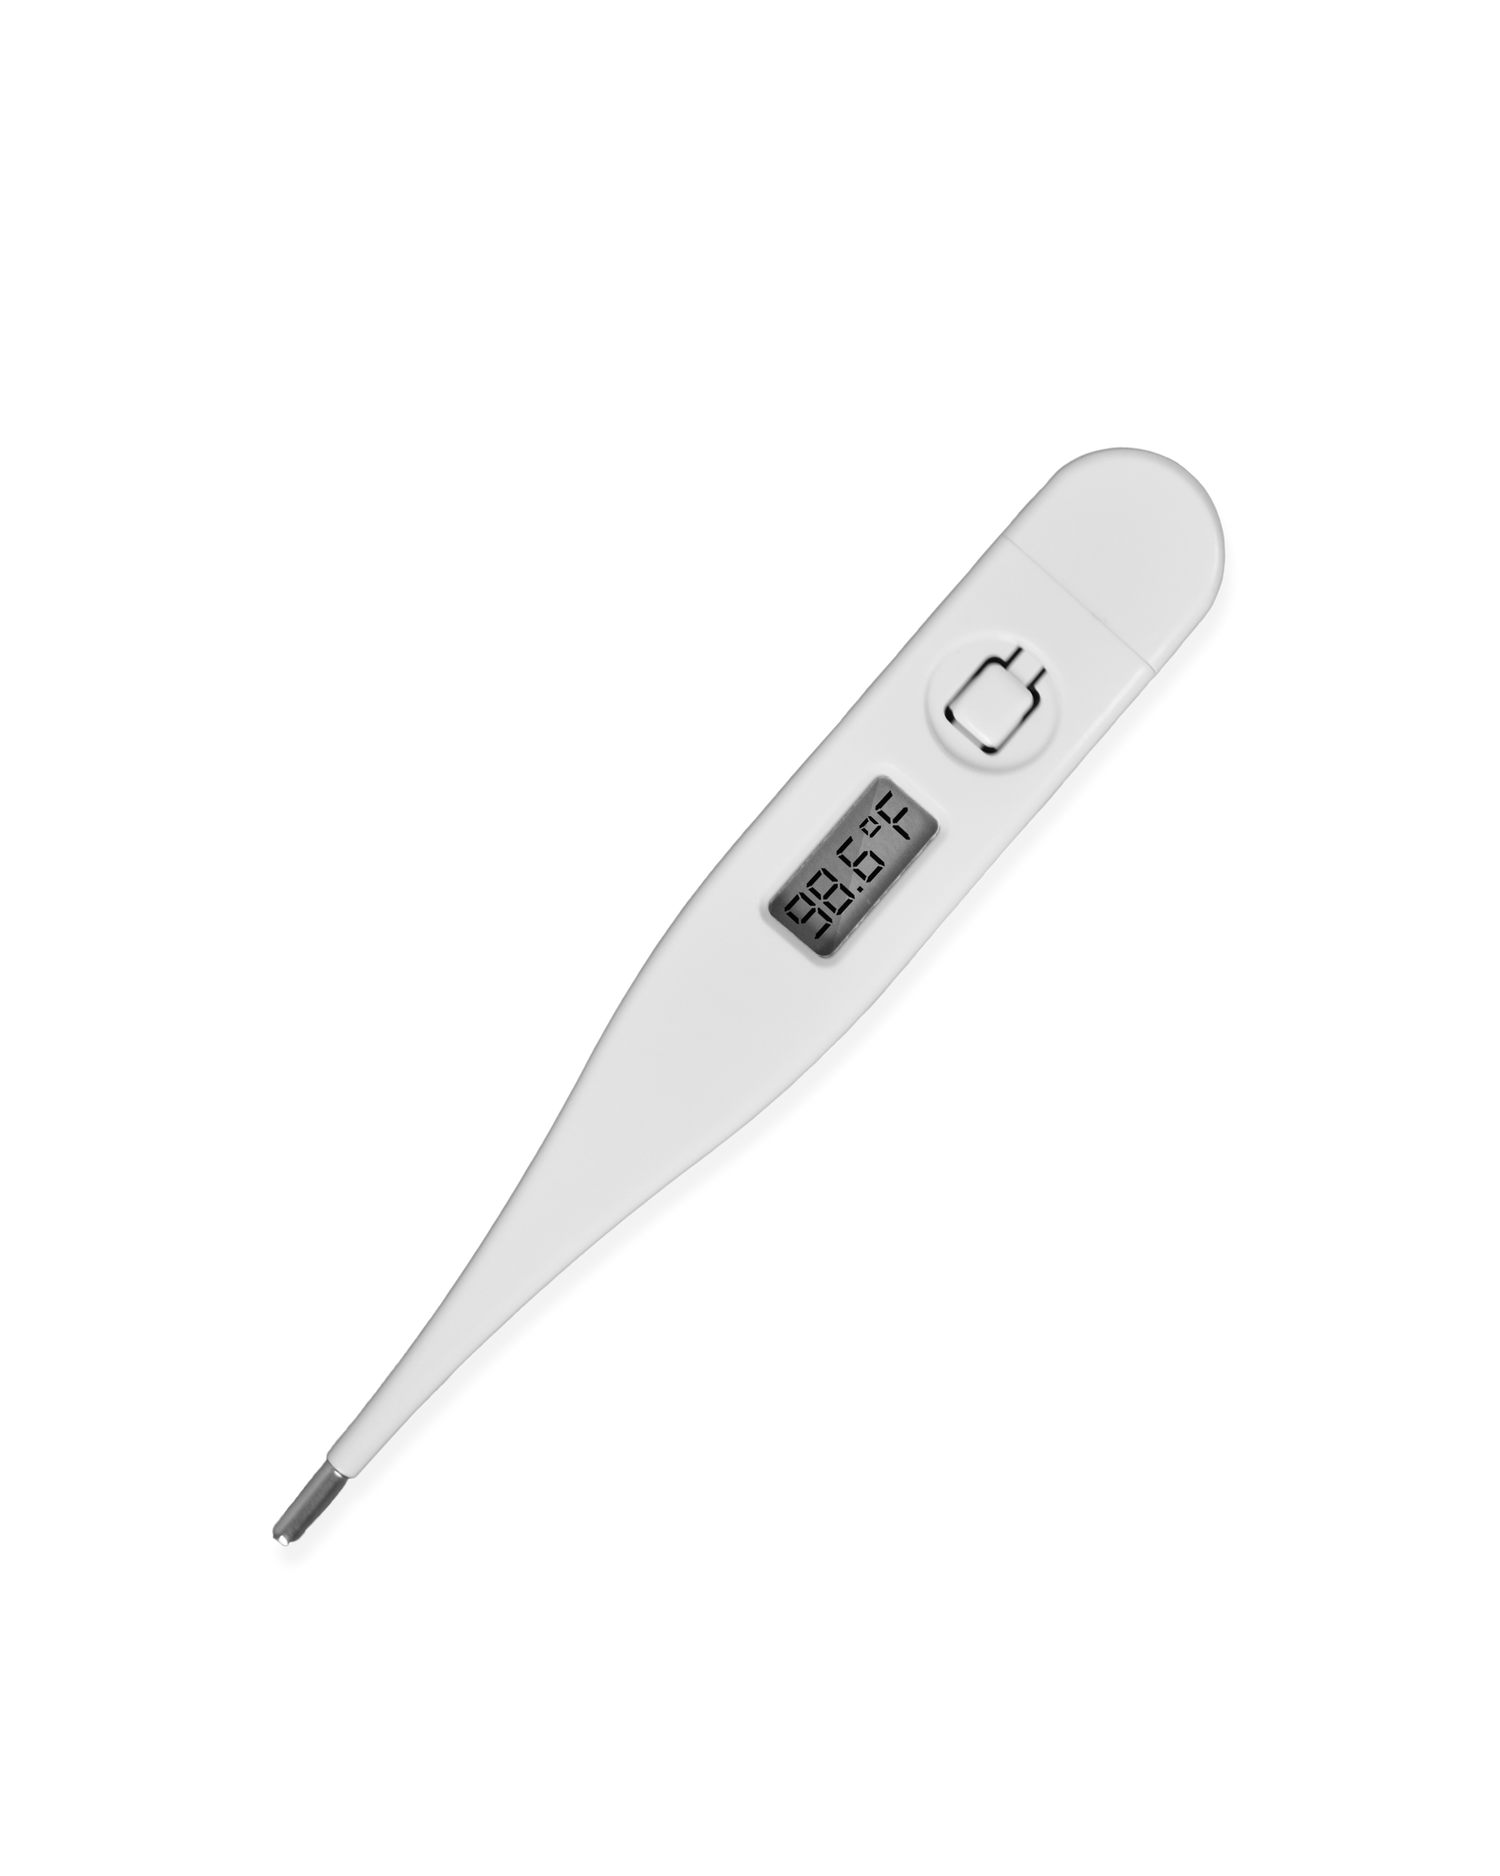 BV Medical Digital Thermometer Rigid Tip 10sec. w/100 Probe Covers Pack